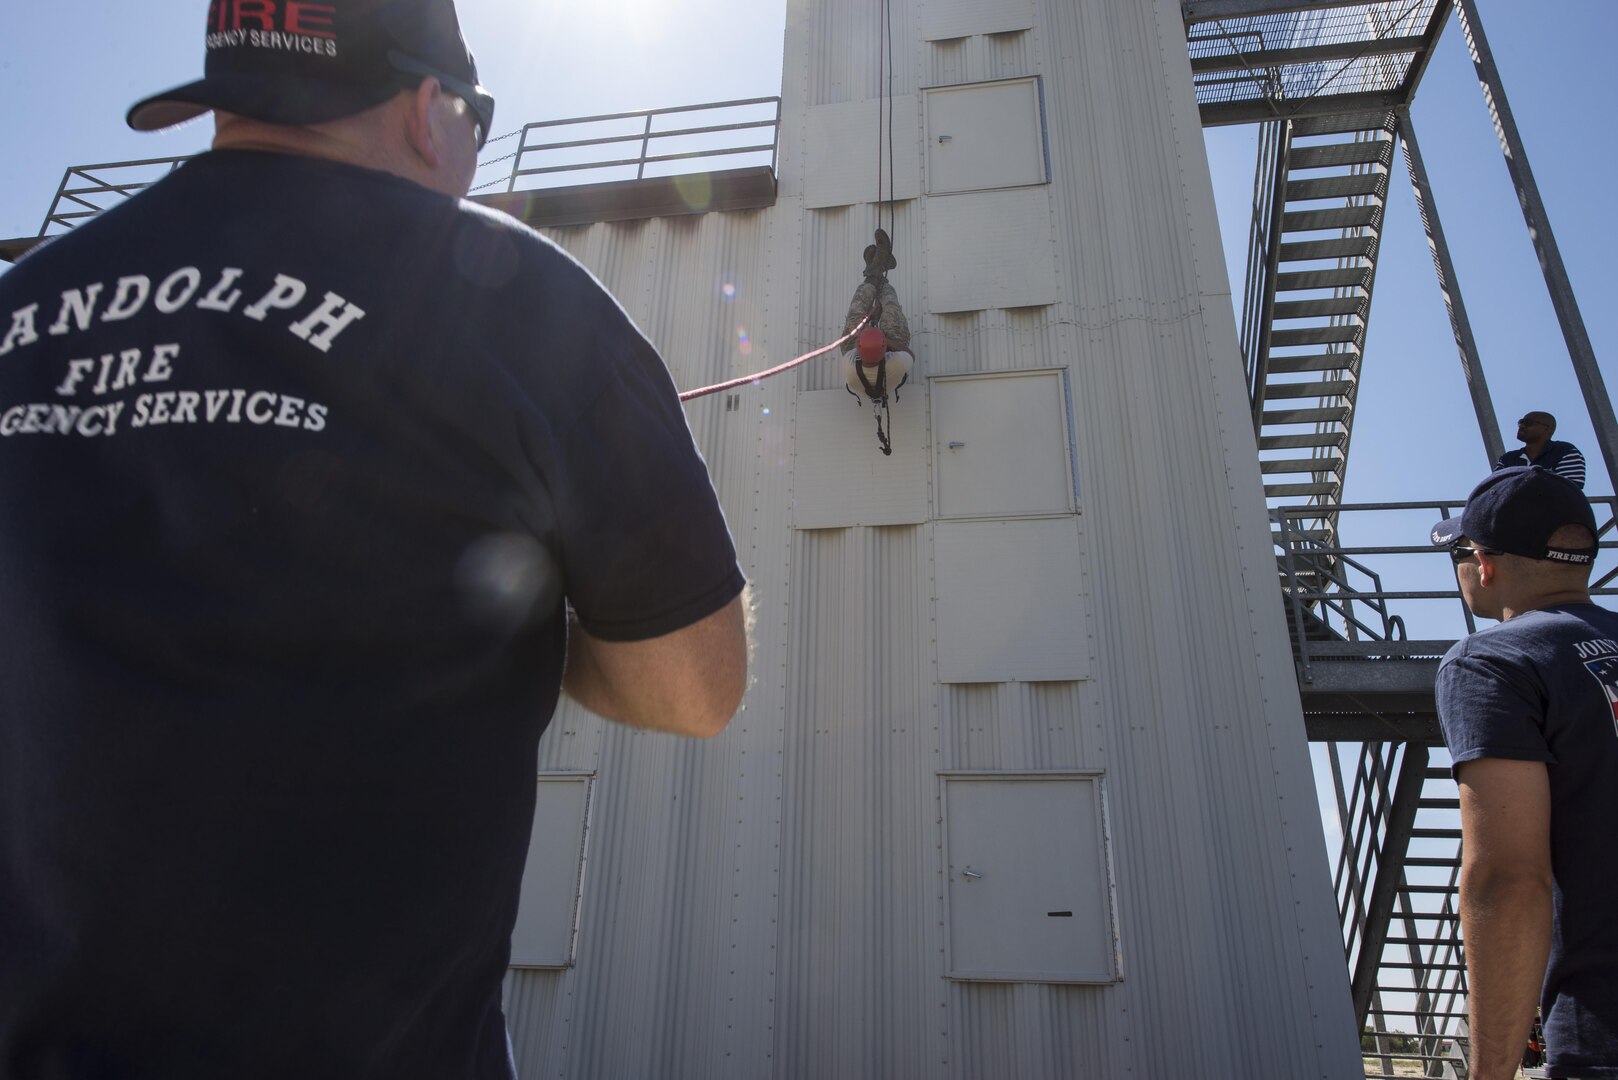 Michael Coscrelli and Senior Airman Christian Torres, Joint Base San Antonio-Randolph firefighters, perform a repelling demonstration during the JBSA Battle of the badges Sept. 12, 2015, at JBSA-Randolph. Battle of the Badges takes place each year to build camaraderie, espirit de corps and cohesion among JBSA first responders through various competitive challenges taken from their daily missions.